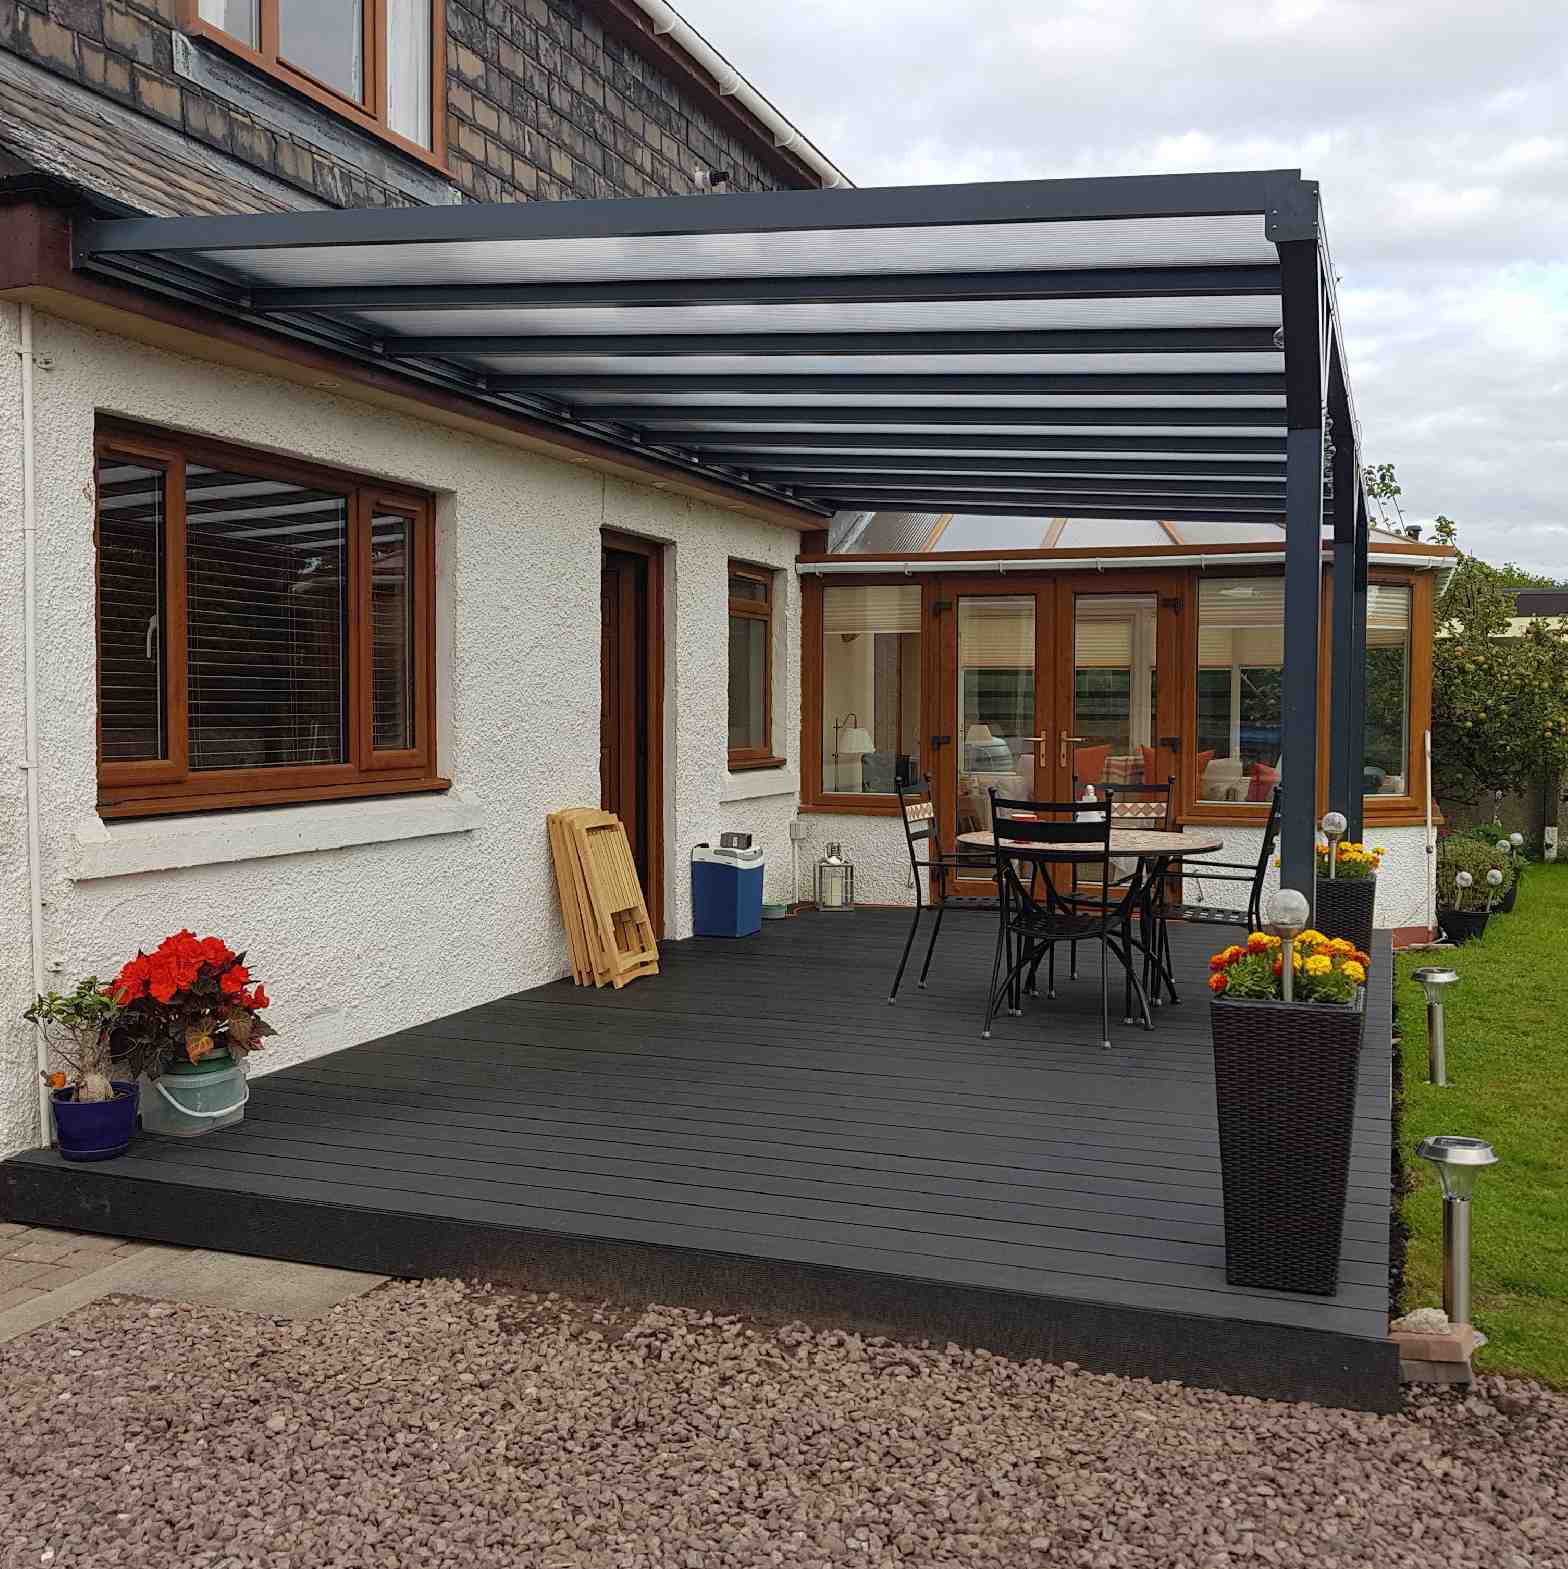 Buy Omega Verandah, Anthracite Grey, 16mm Polycarbonate Glazing - 3.1m (W) x 4.5m (P), (2) Supporting Posts online today